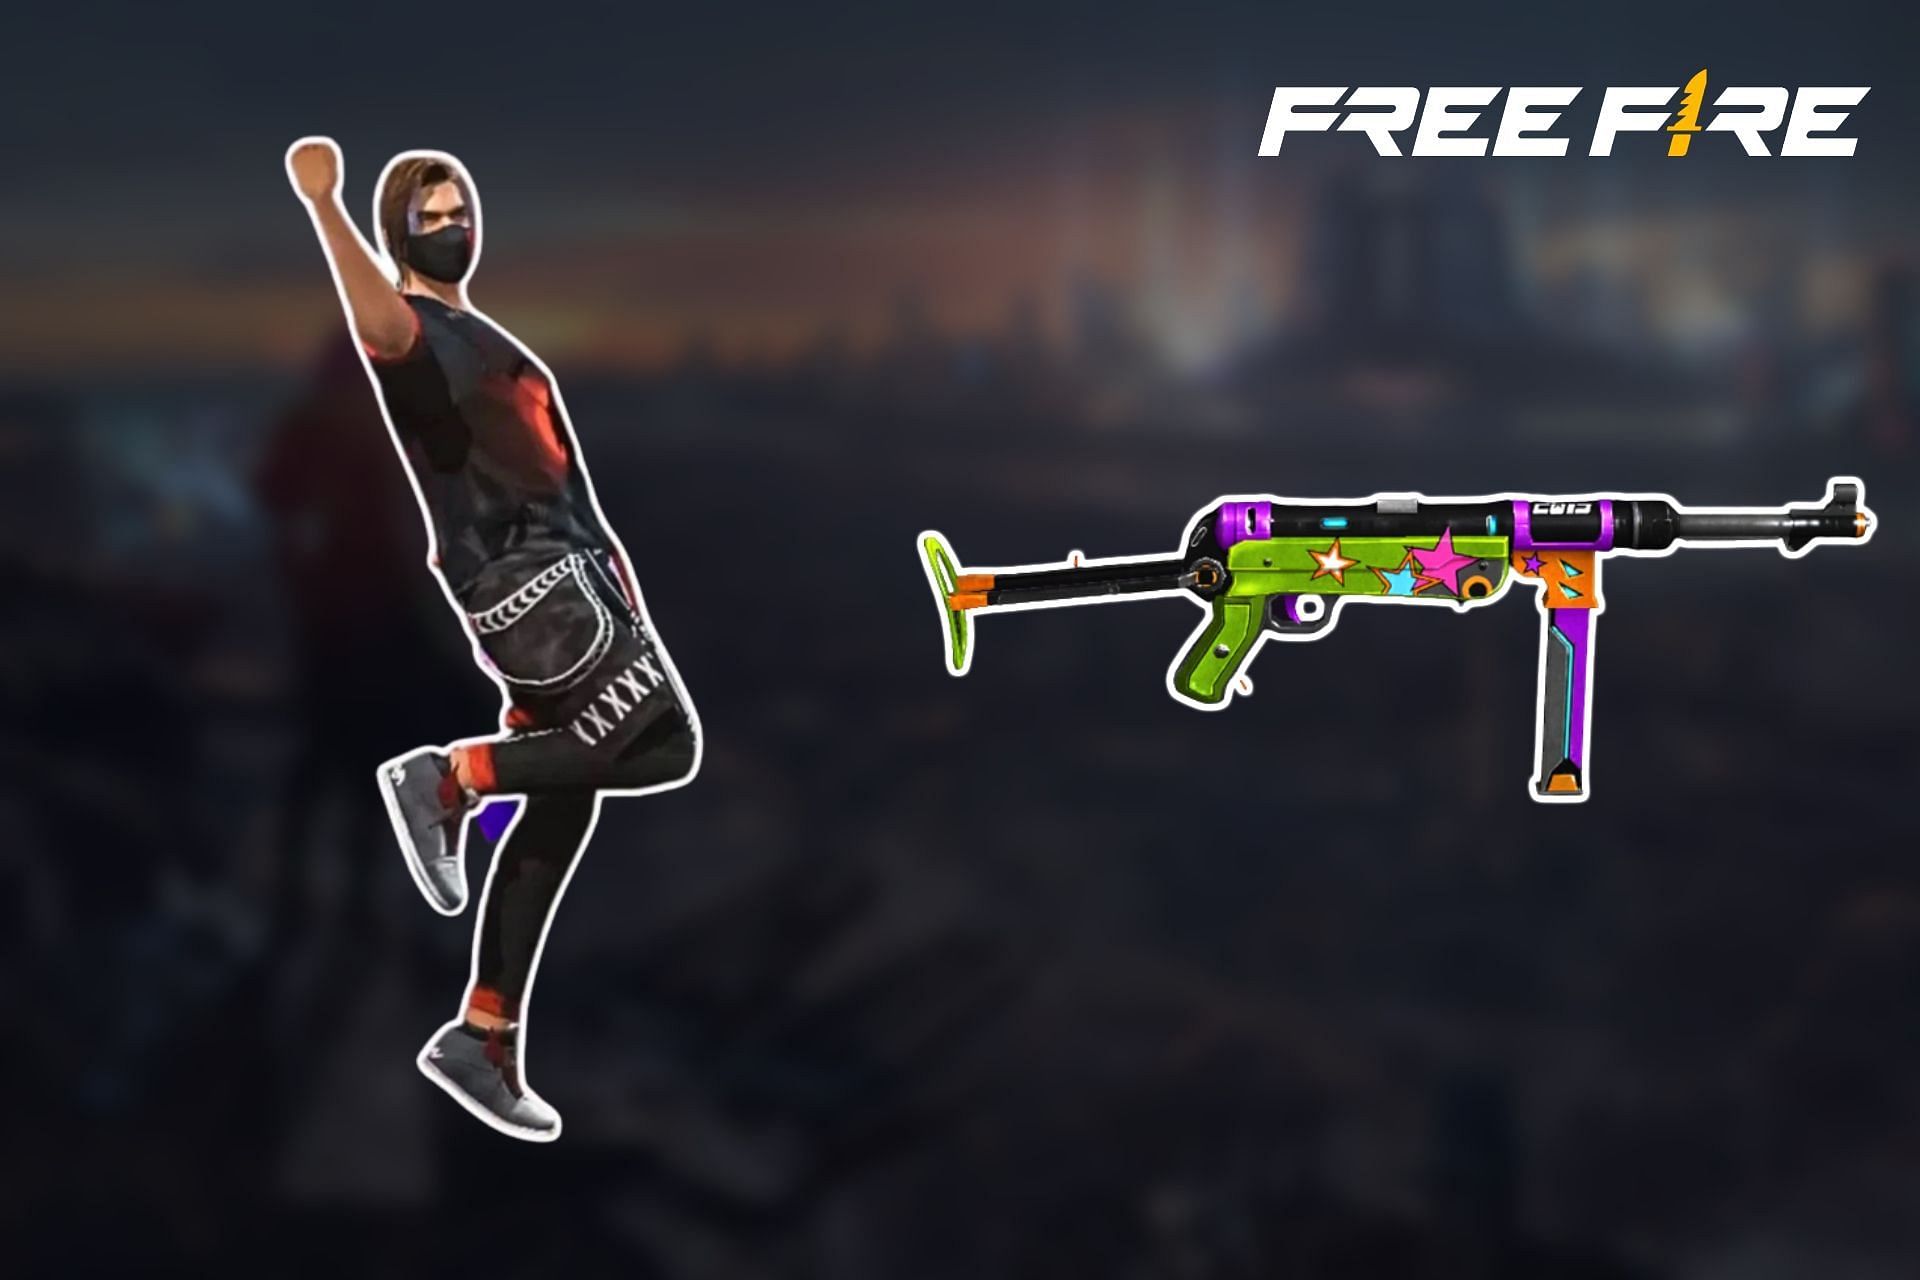 Here are the Free Fire redeem codes for free emotes and gun skins (Image via Sportskeeda) 